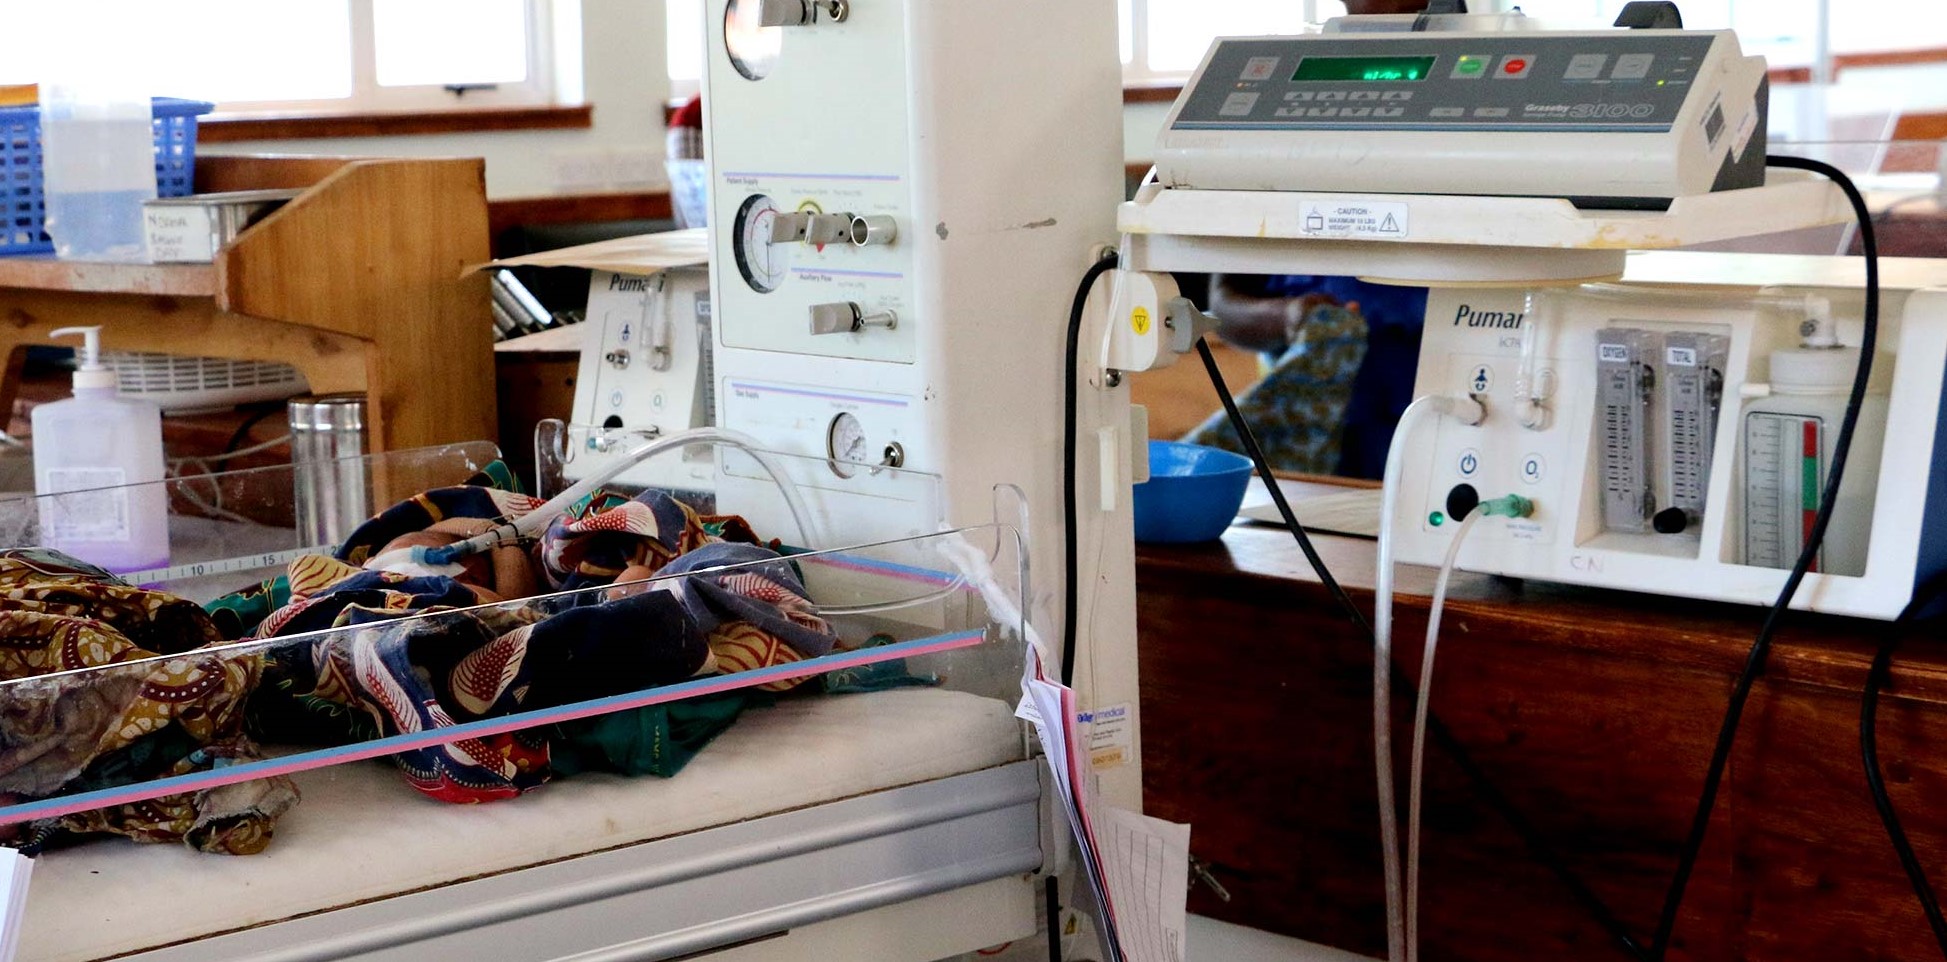 Baby on CPAP machine in a hospital in Malawi. Credit: NEST360, Rice University